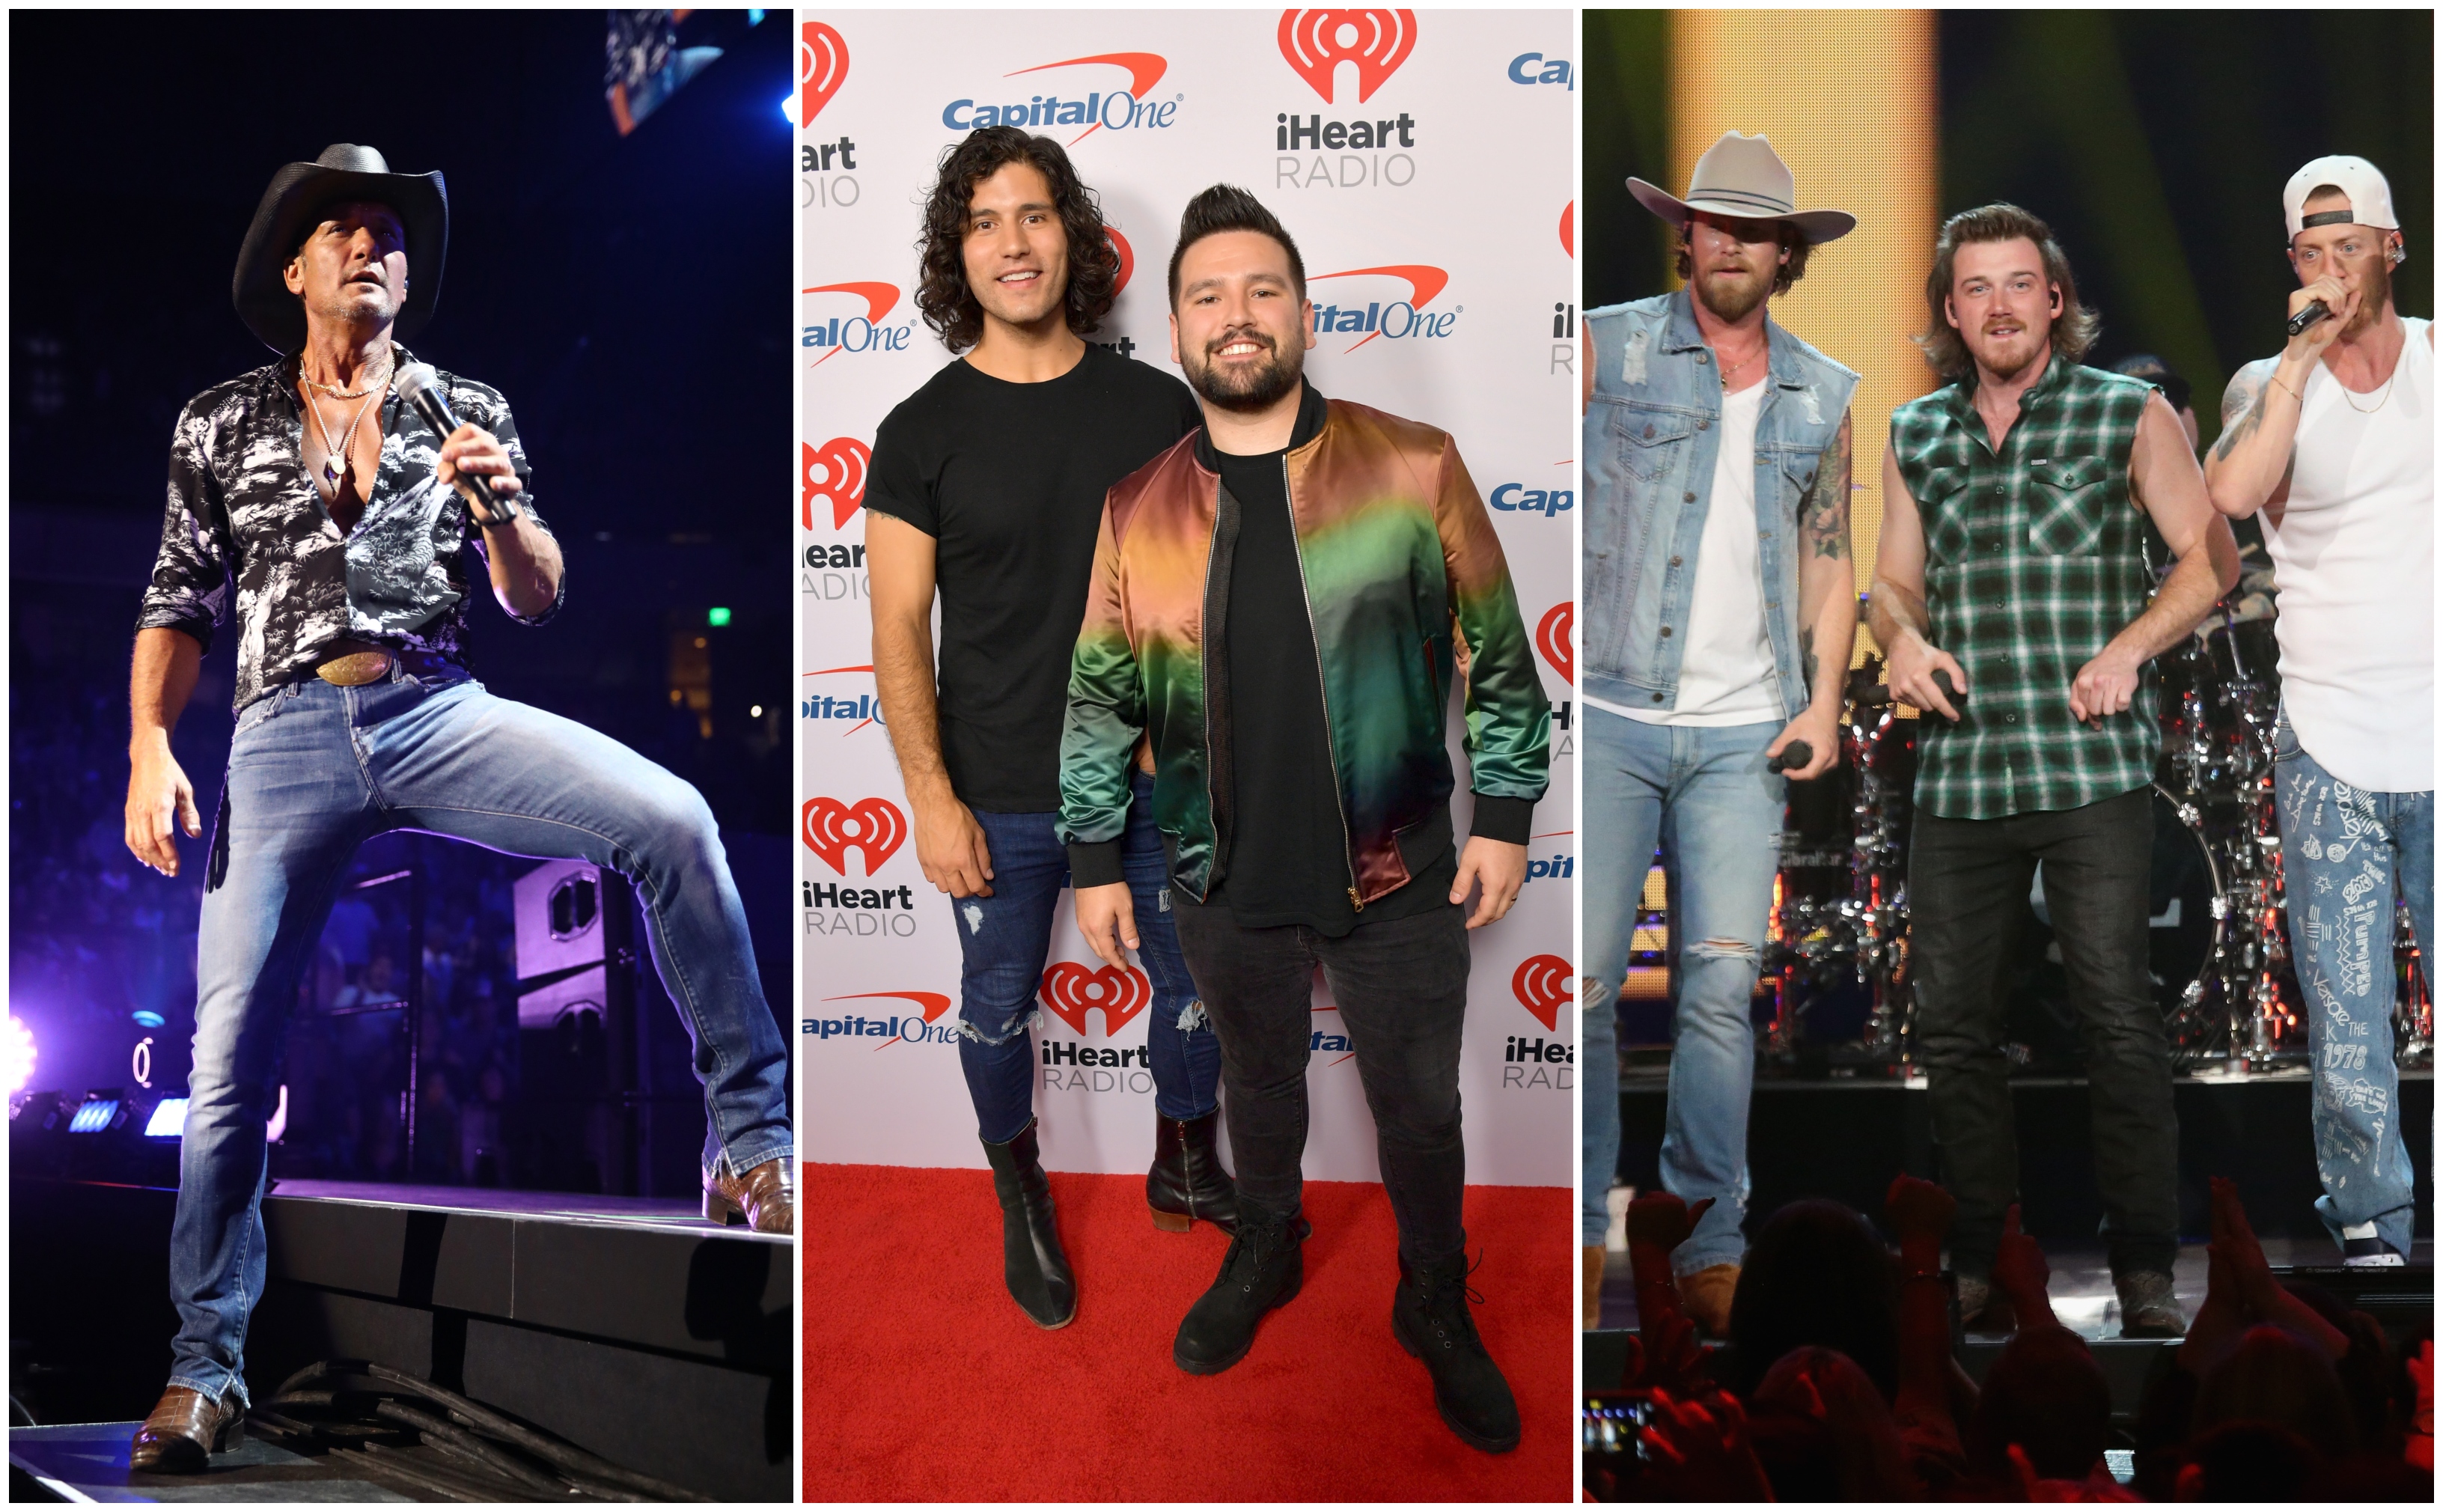 Tim McGraw, FGL, Dan + Shay and More Take Over Austin for 2019 iHeartCountry Festival